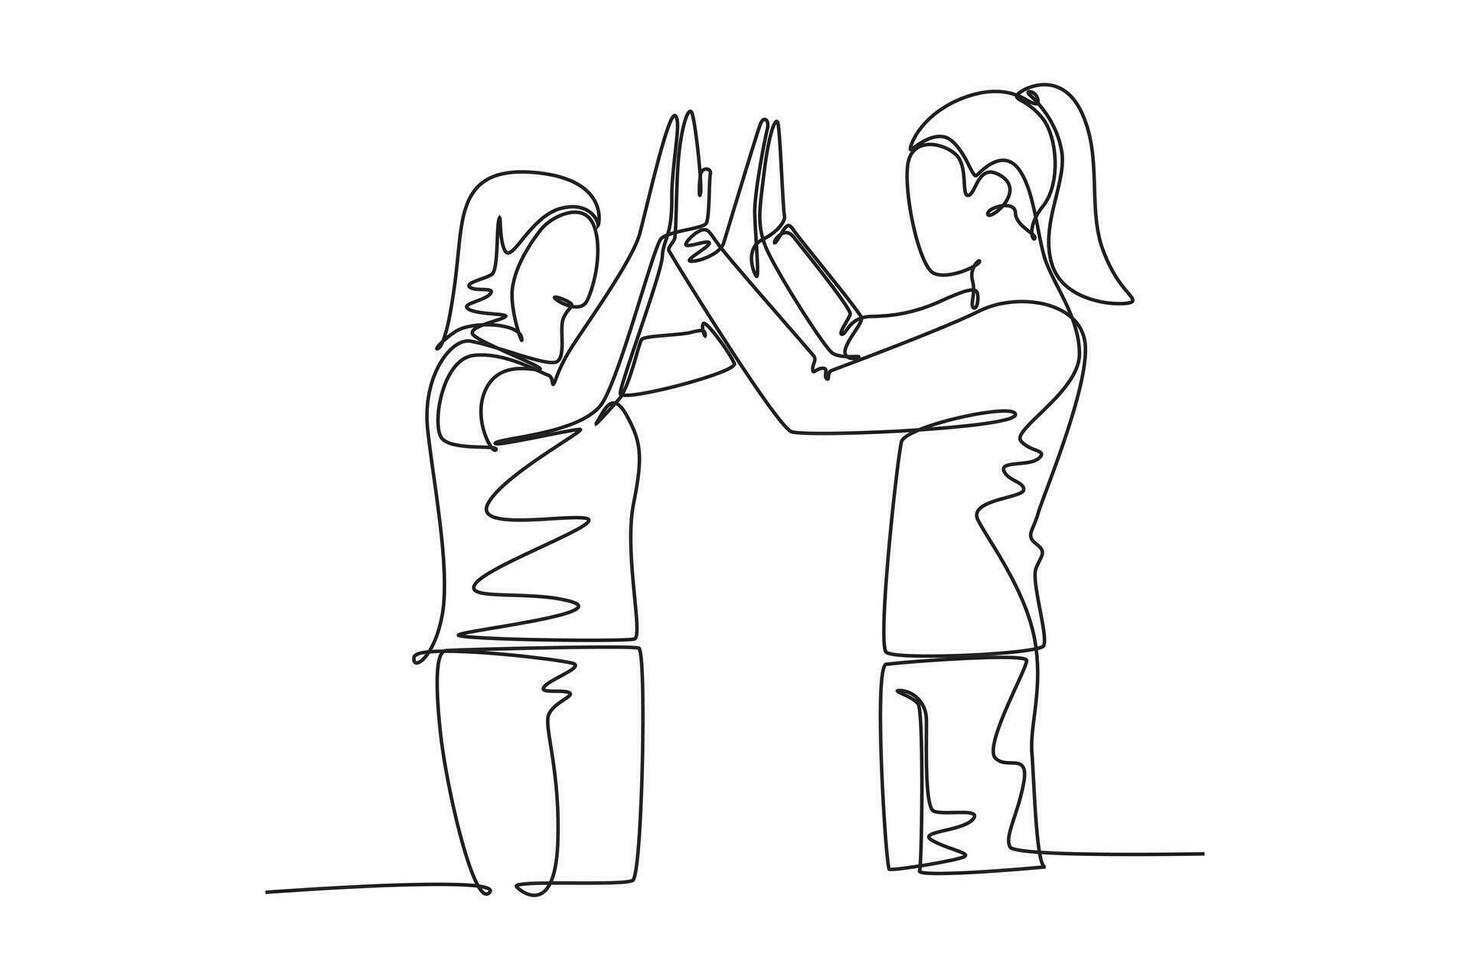 Single one line drawing two best friends girls reunite and giving high five gesture when meeting at the street. Happy friendship concept. Modern continuous line draw design graphic vector illustration